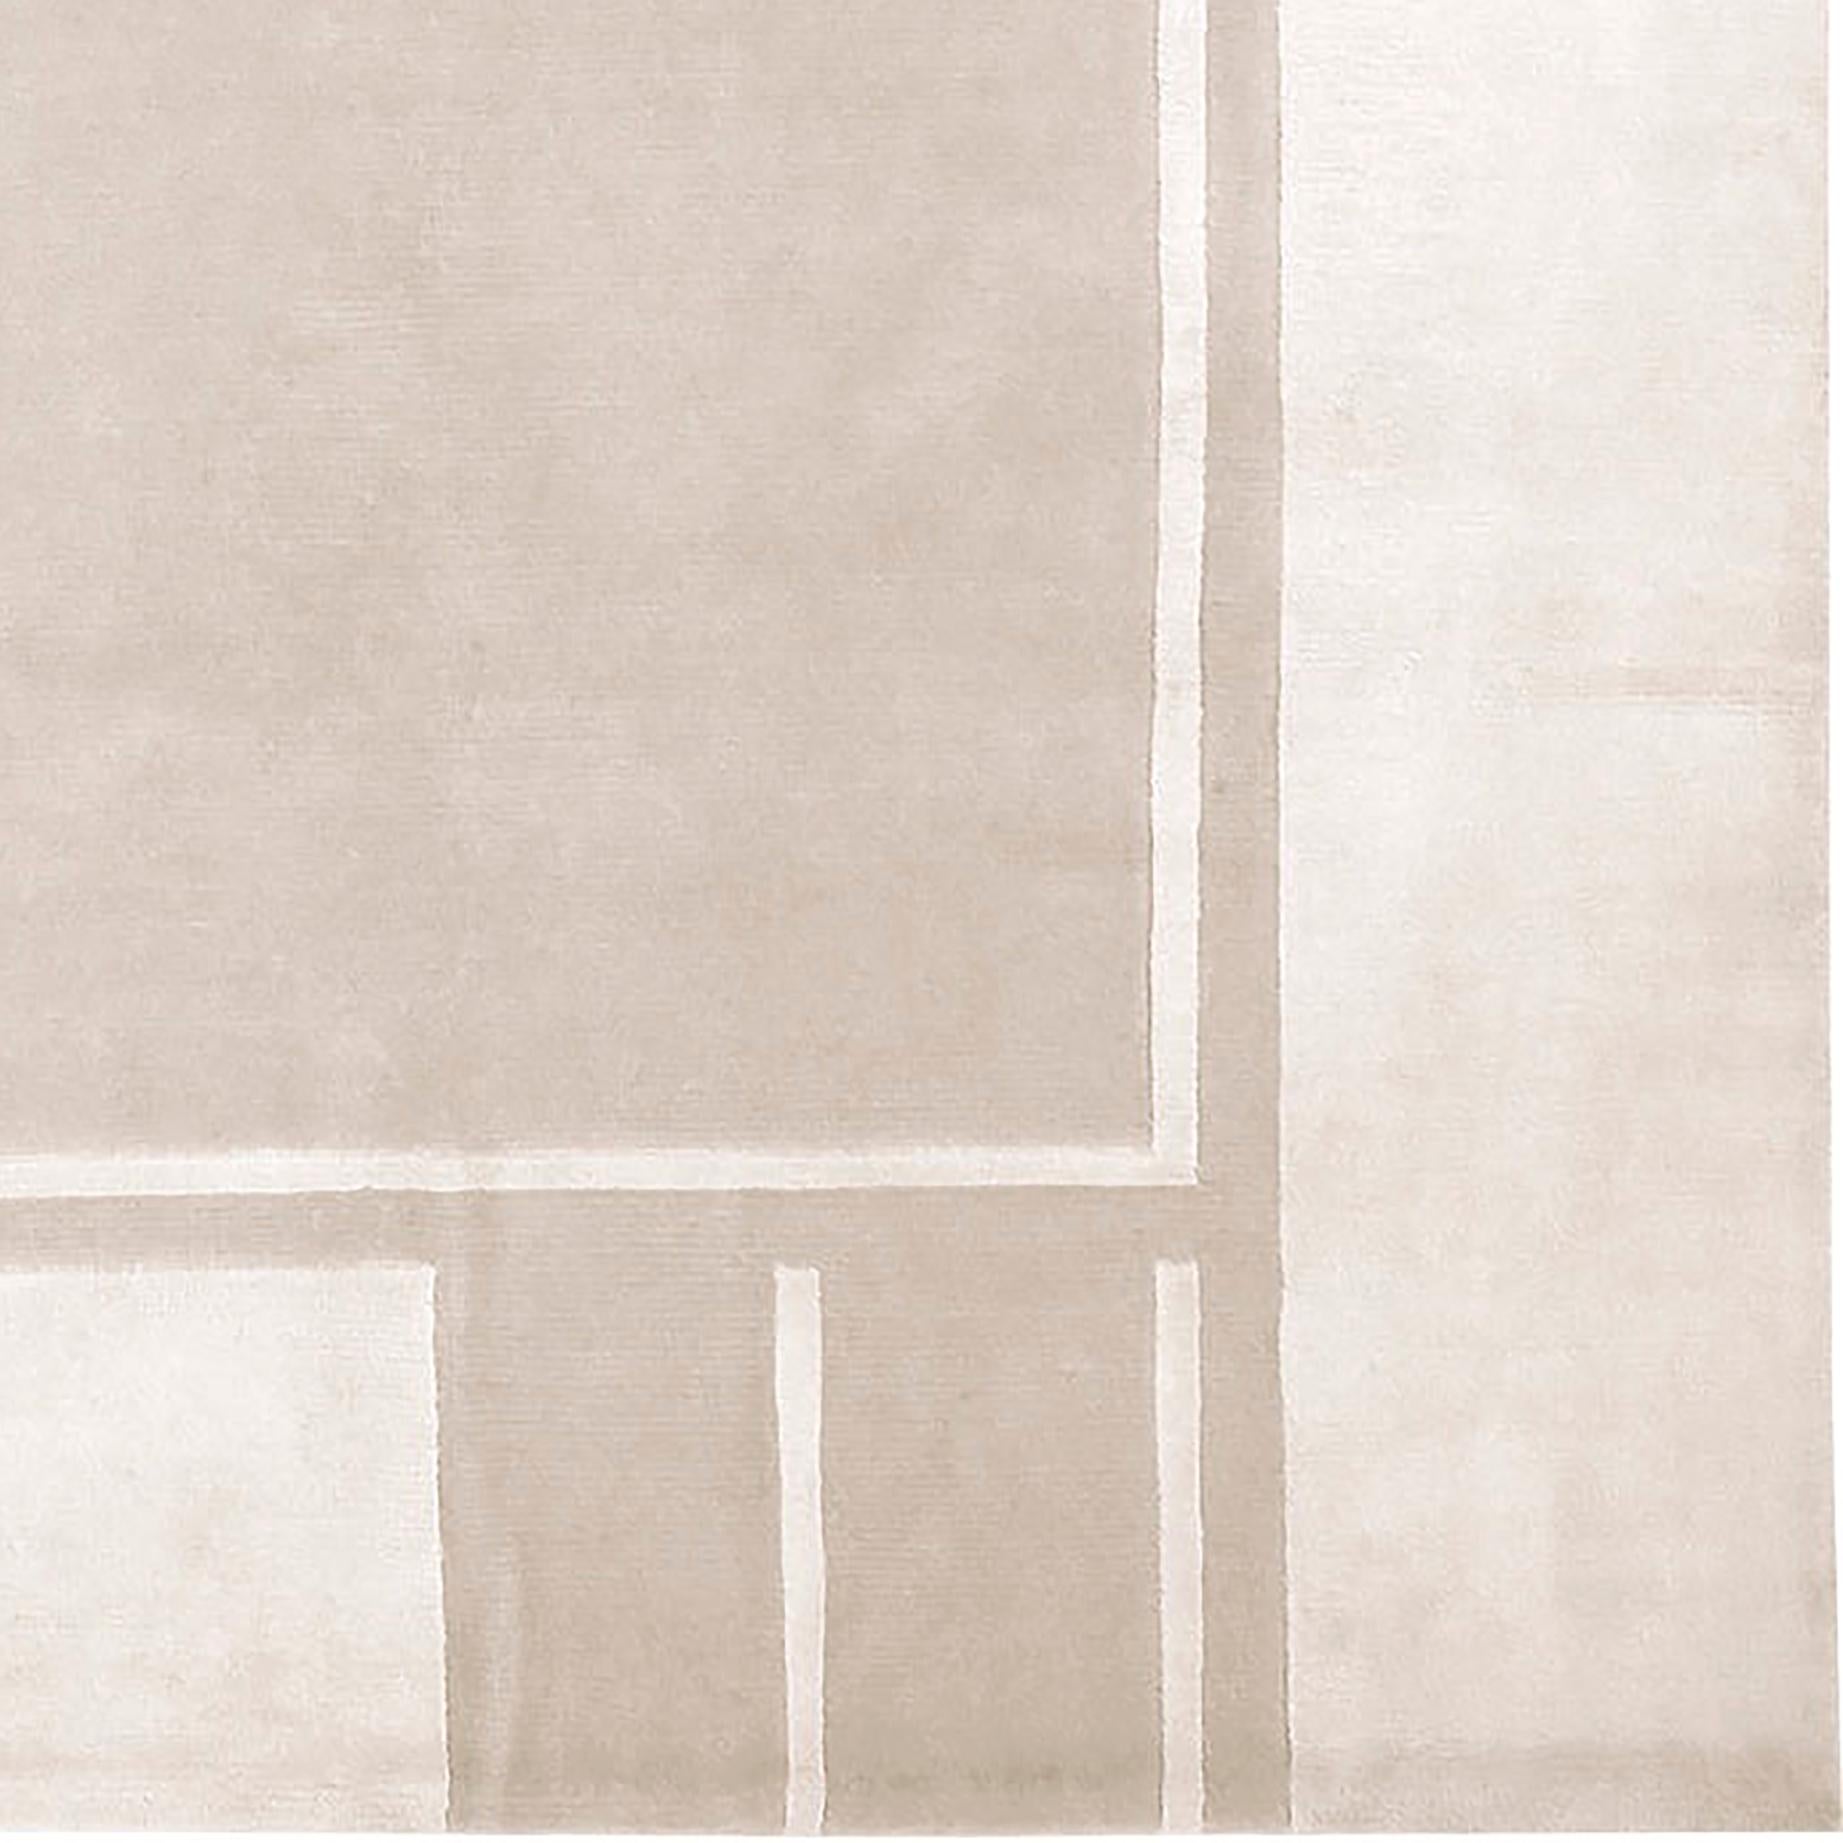 Frame: a timeless Classic that is perfect for any interior.
This rug is hand knotted in Nepal by our artisans by using 20% silk and 80% fine Himalayan wool dyed using vegetable and mineral pigments. The base is 5 mm high, while the design is 7 mm